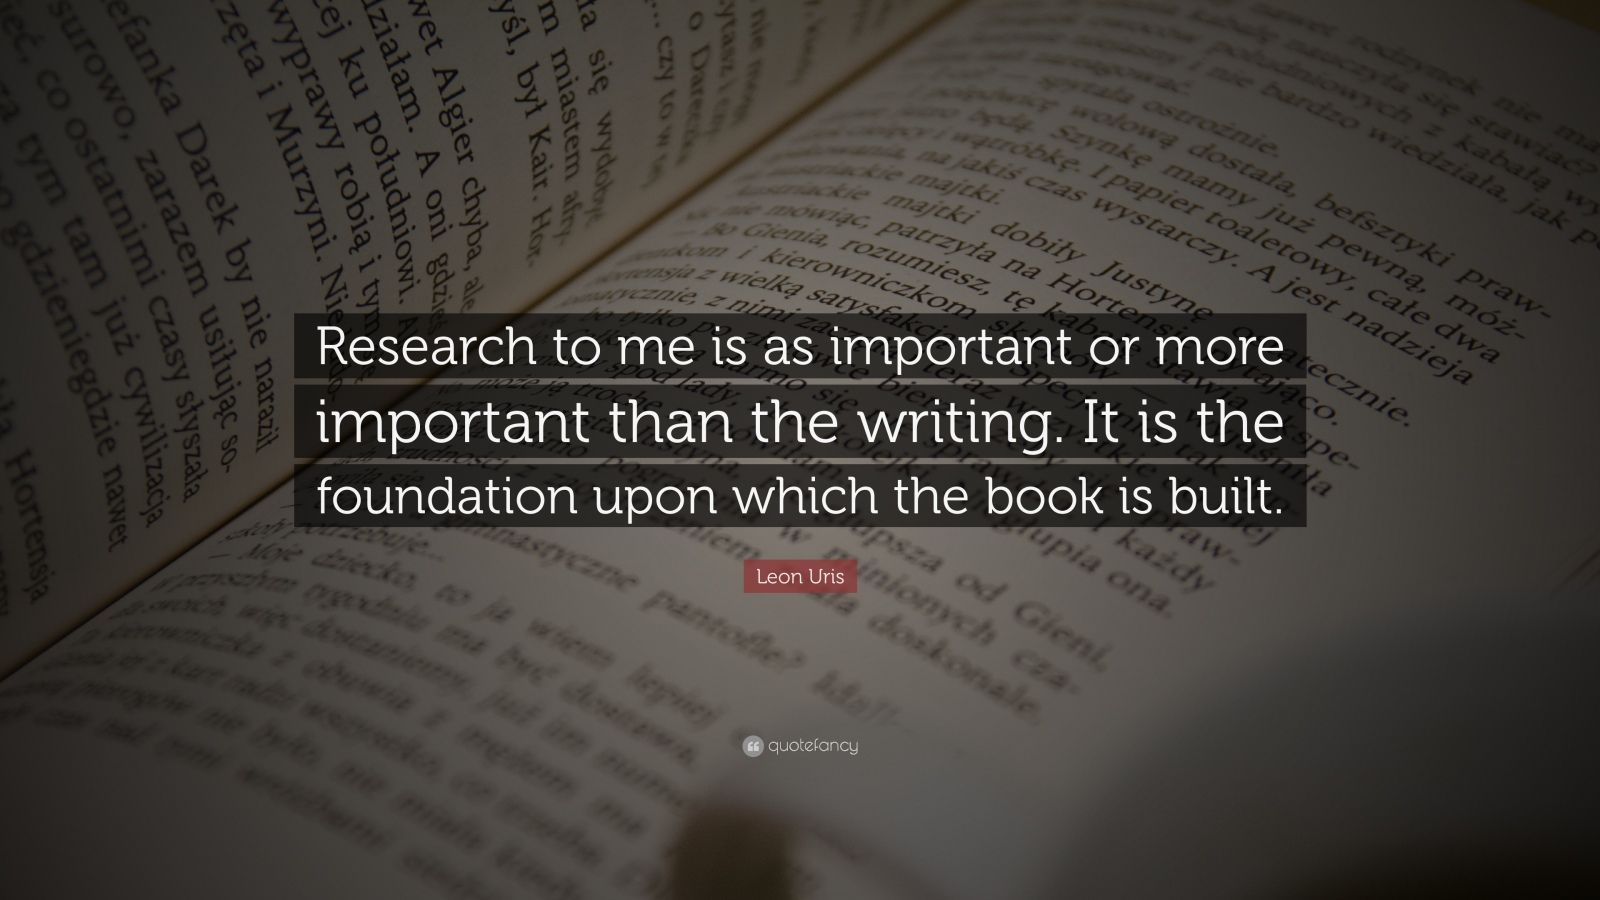 Leon Uris Quote: “Research to me is as important or more important than